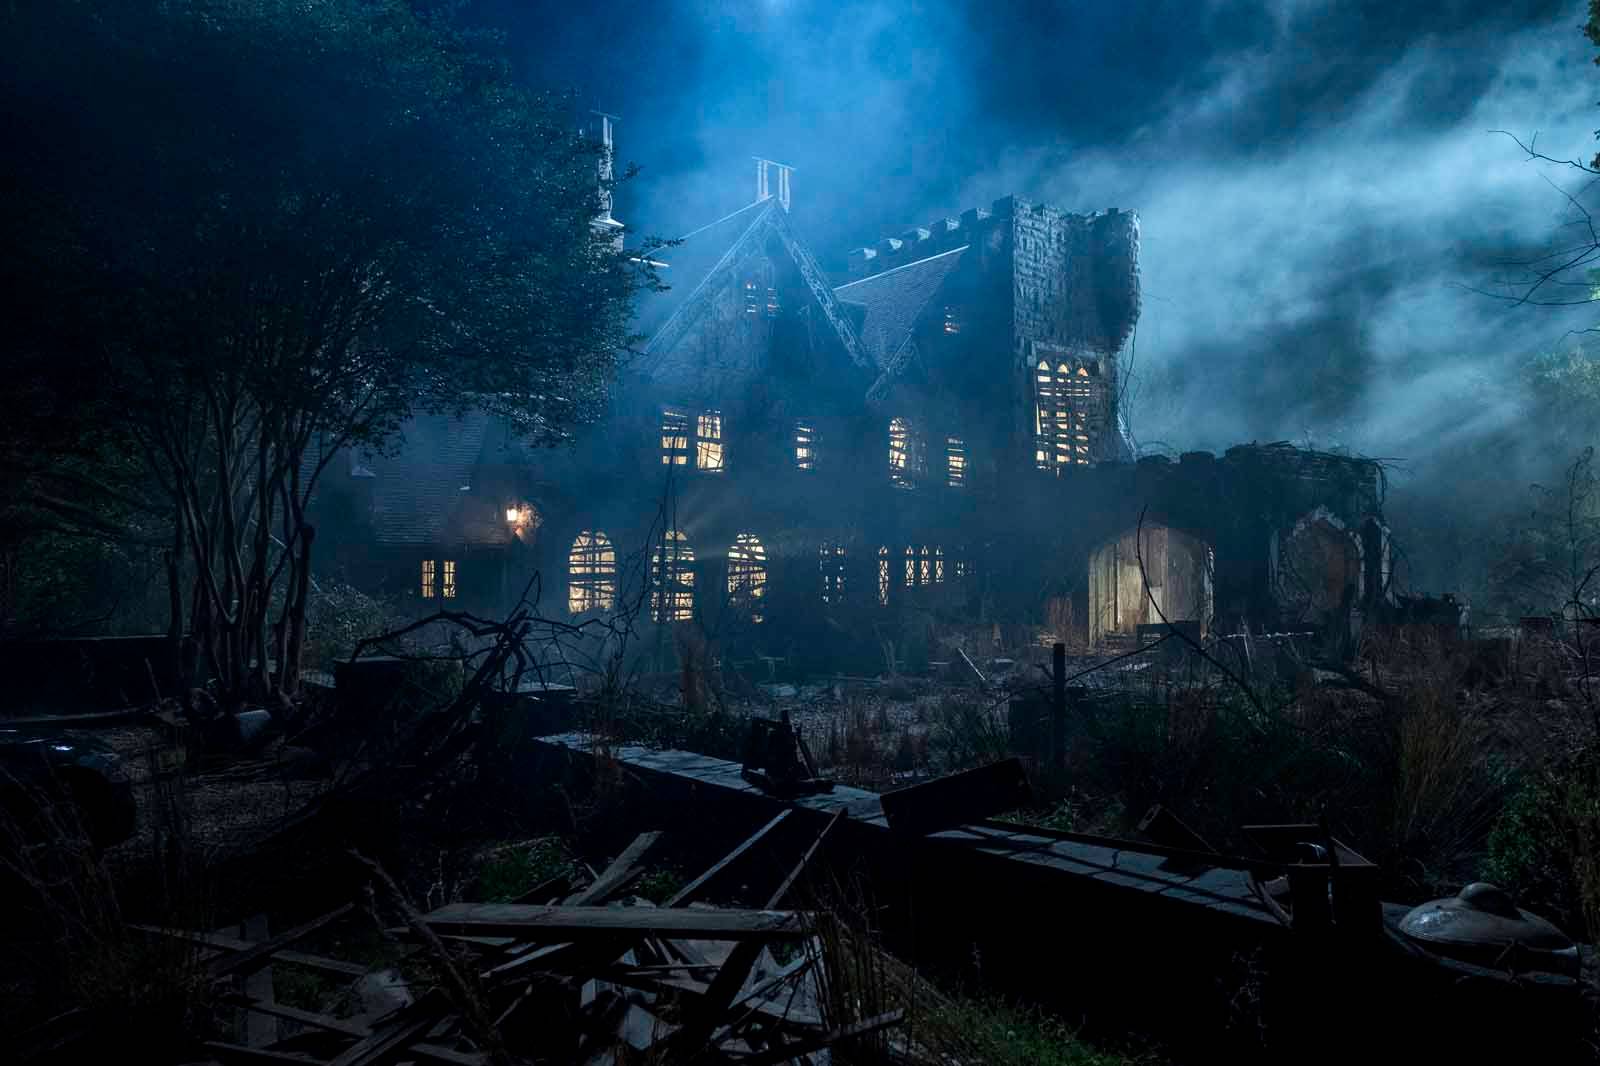 The haunted house of "The Haunting of Hill House" (2018)